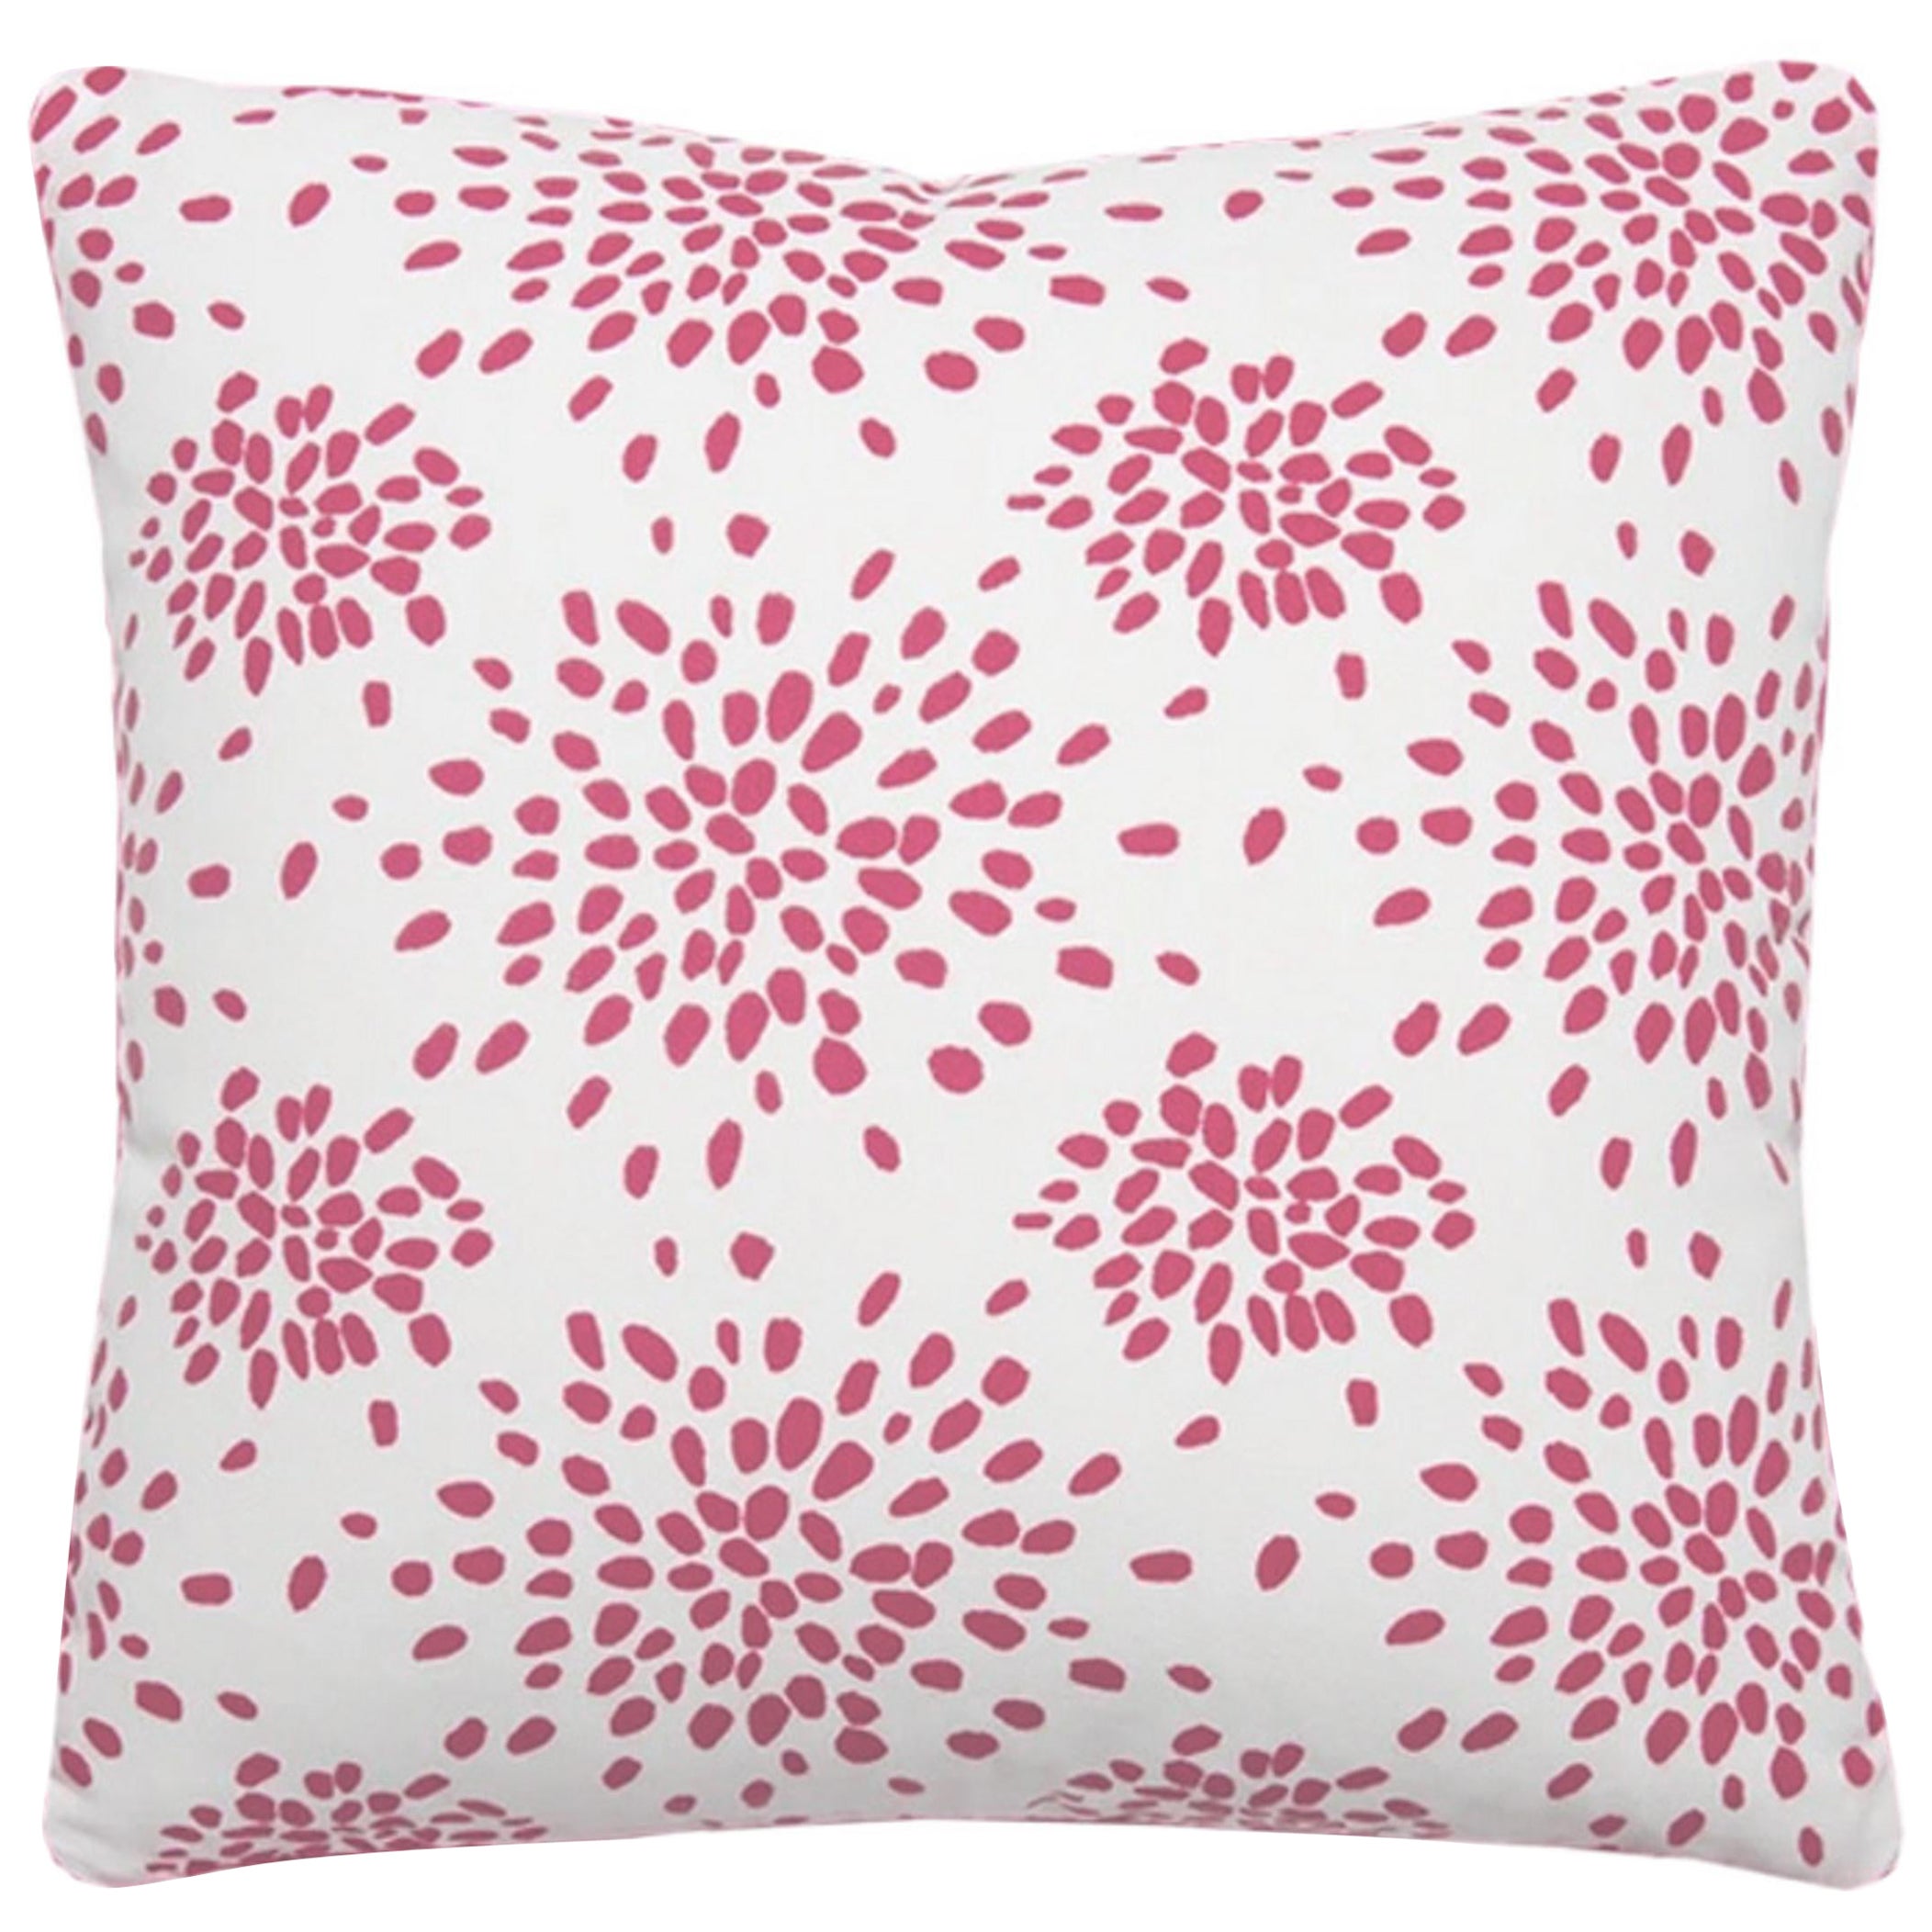 Fireworks Pillow For Sale